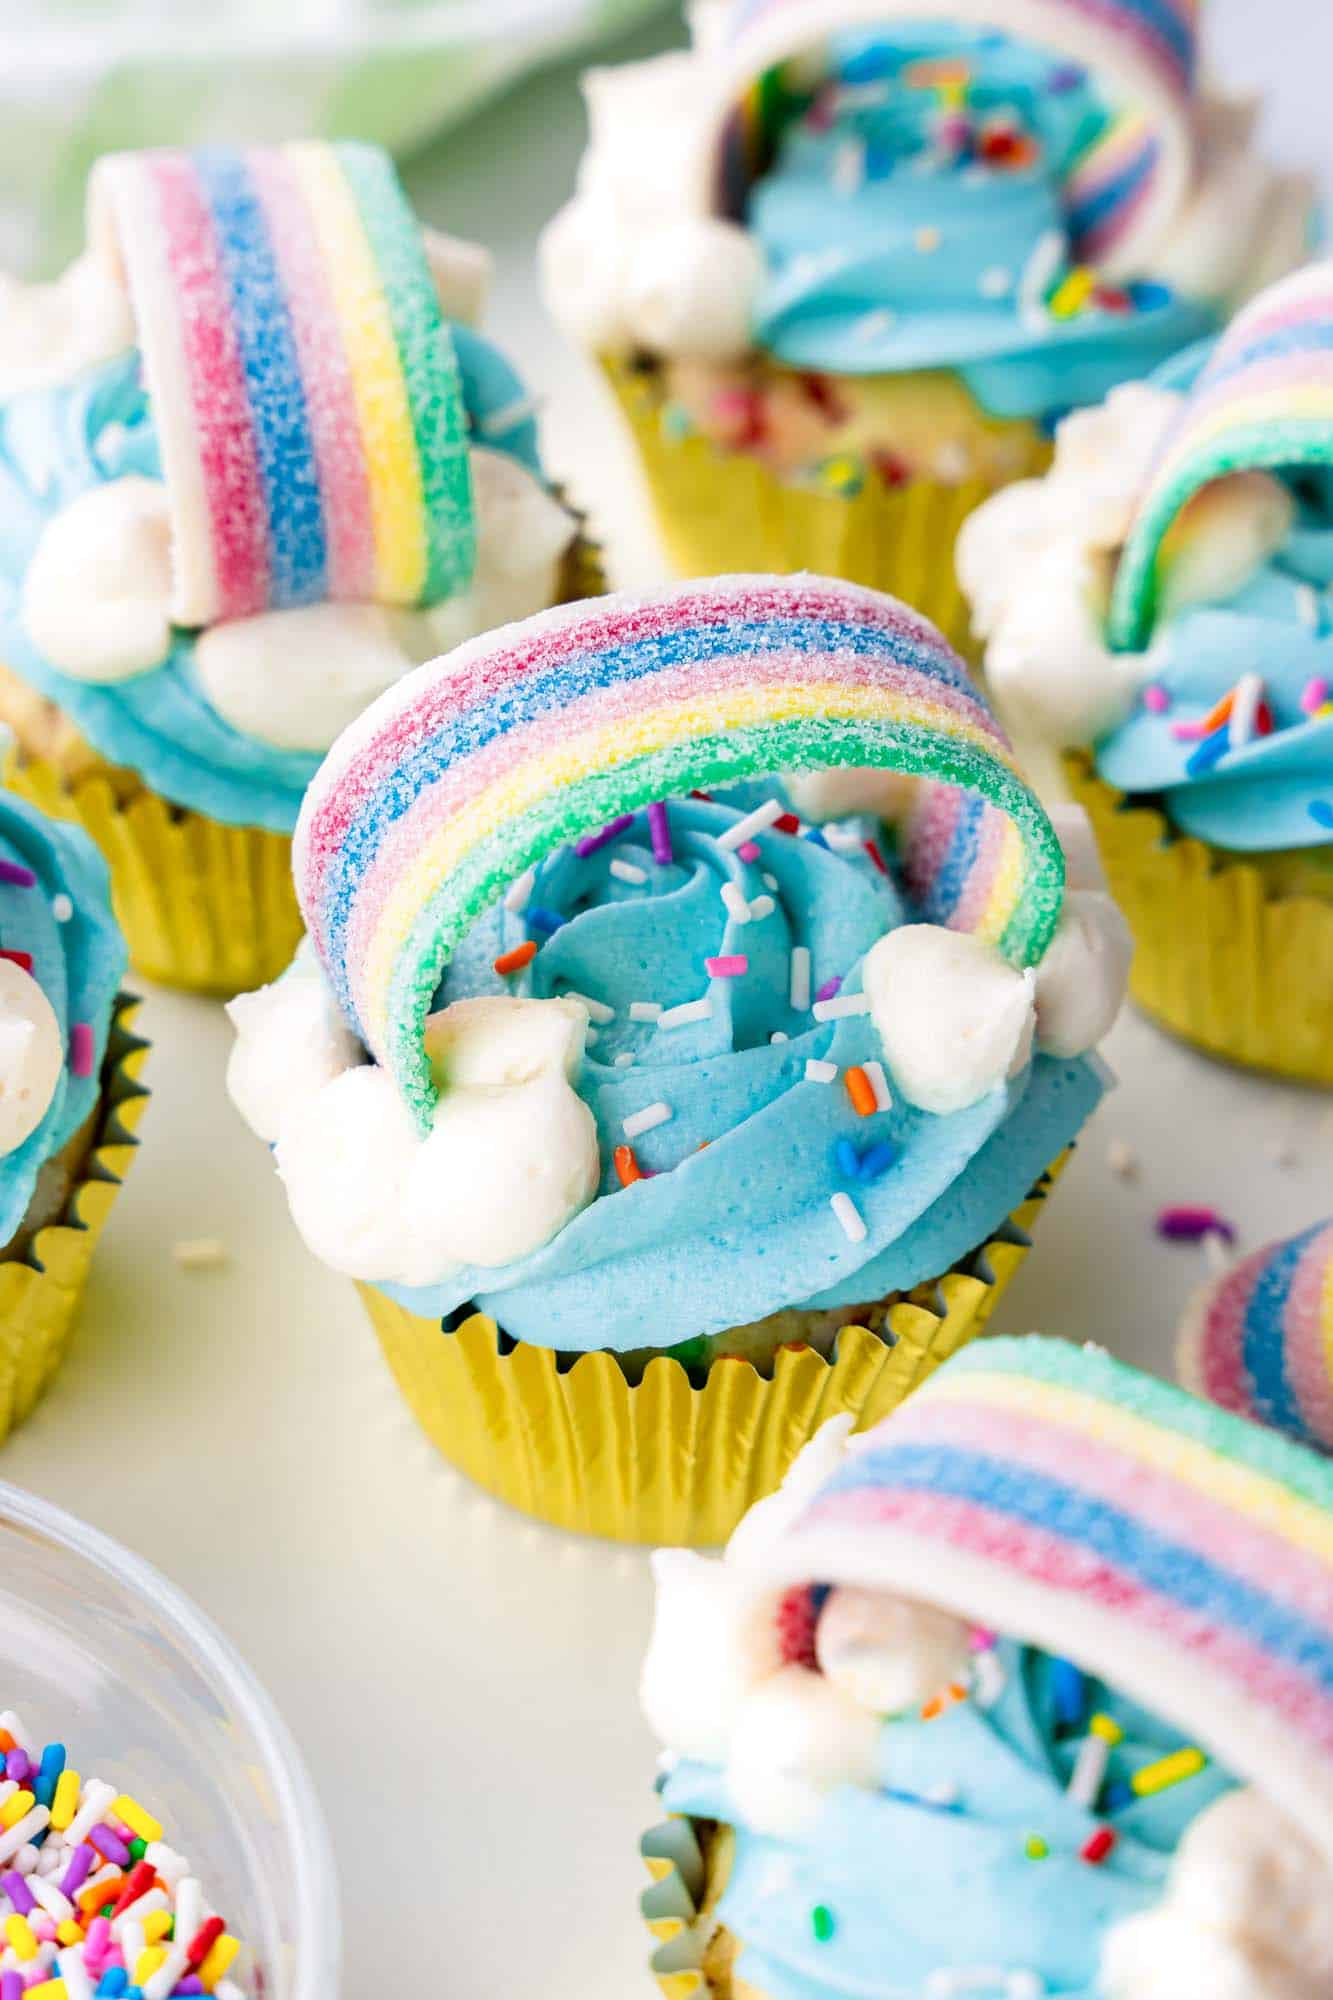 Rainbow cupcakes with rainbow candy and blue buttercream frosting